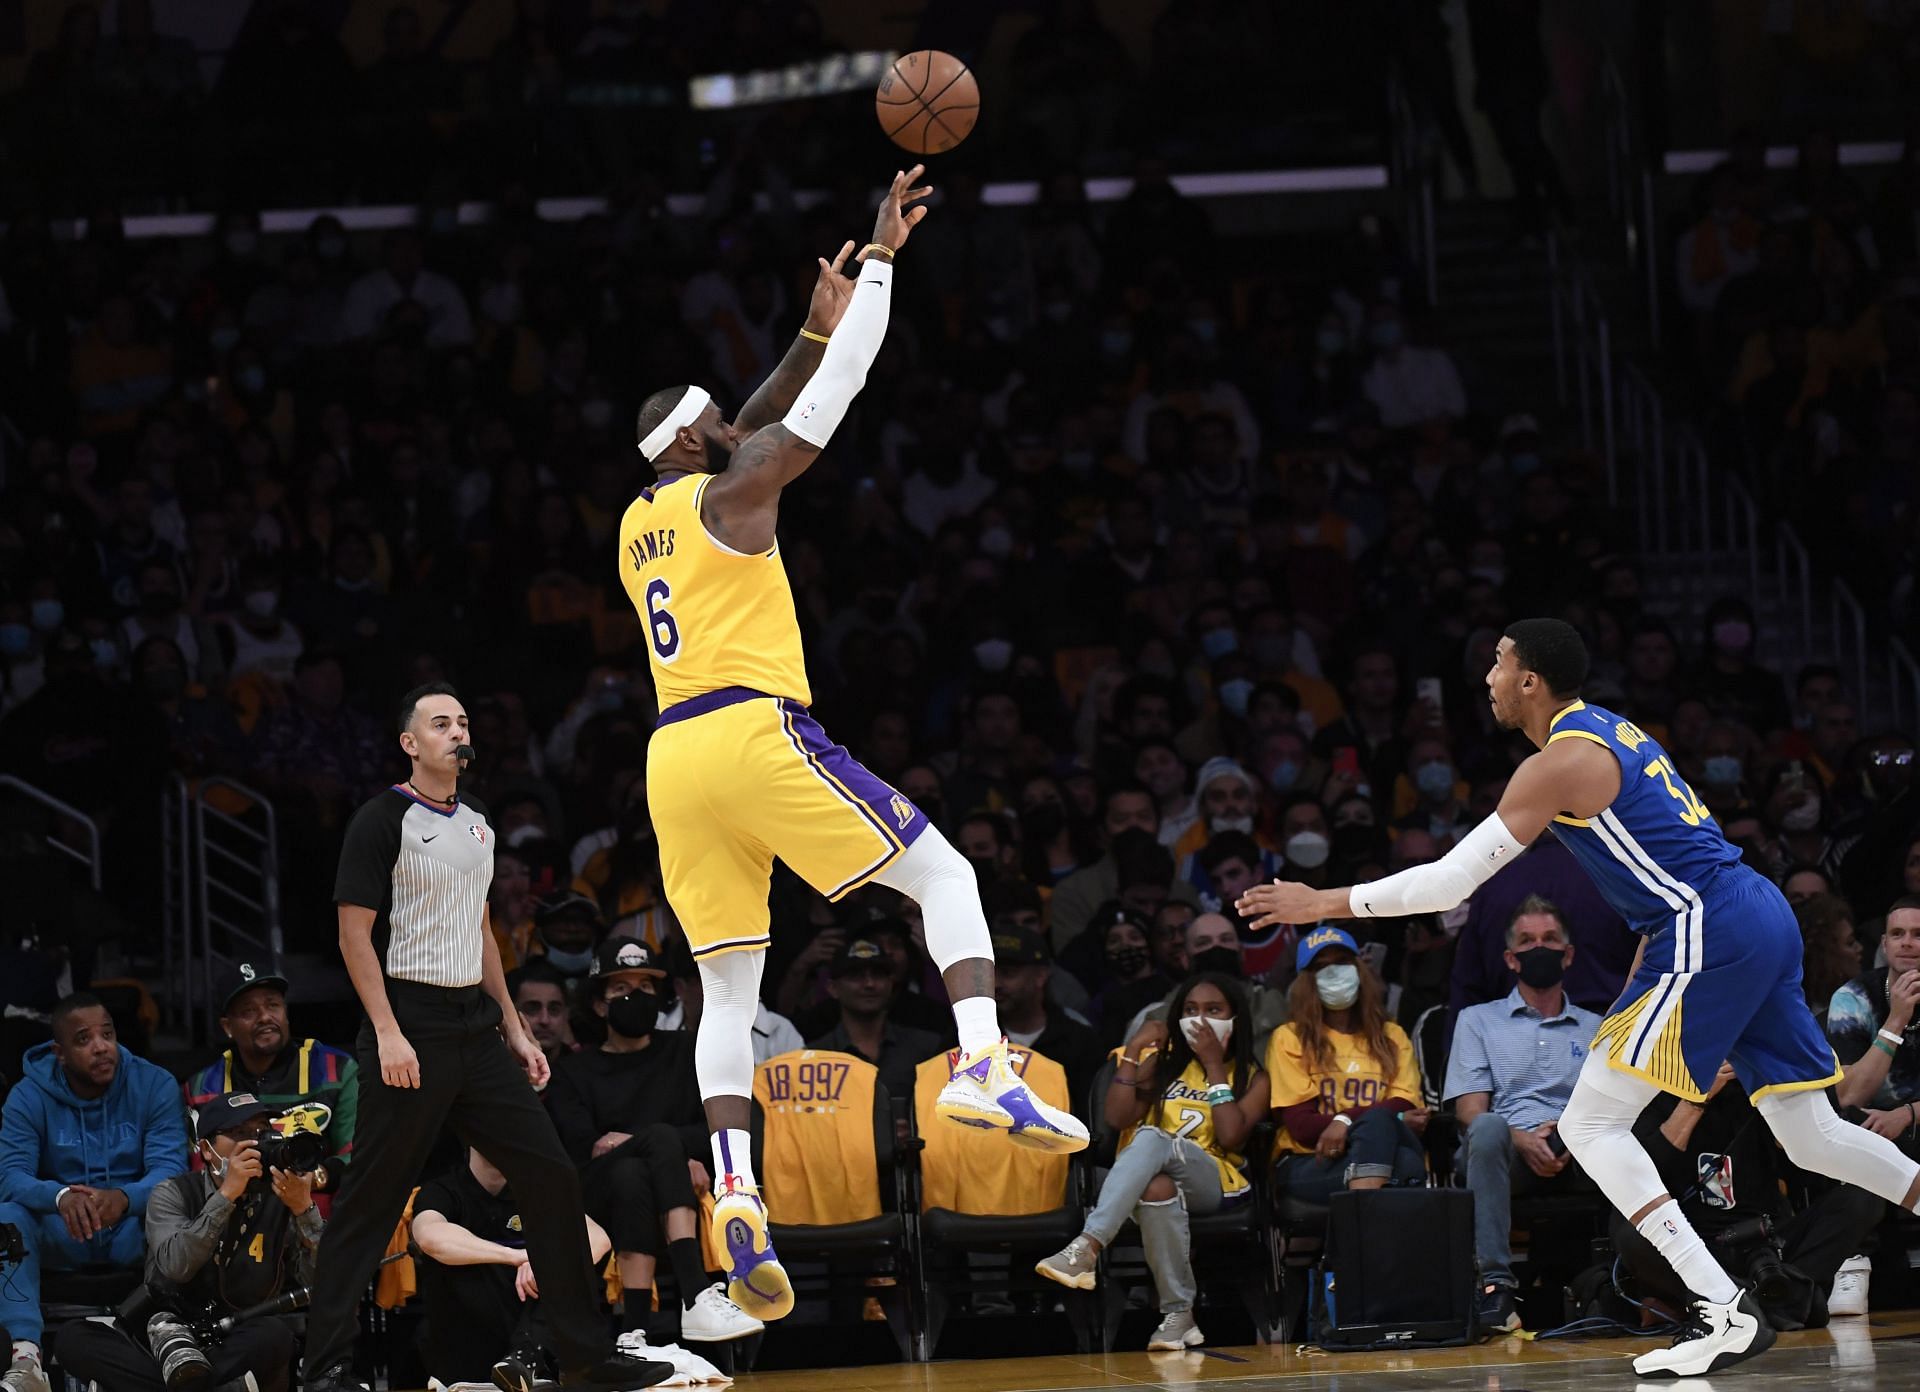 LeBron James shoots a fadeaway in the LA Lakers vs Golden State Warriors matchup